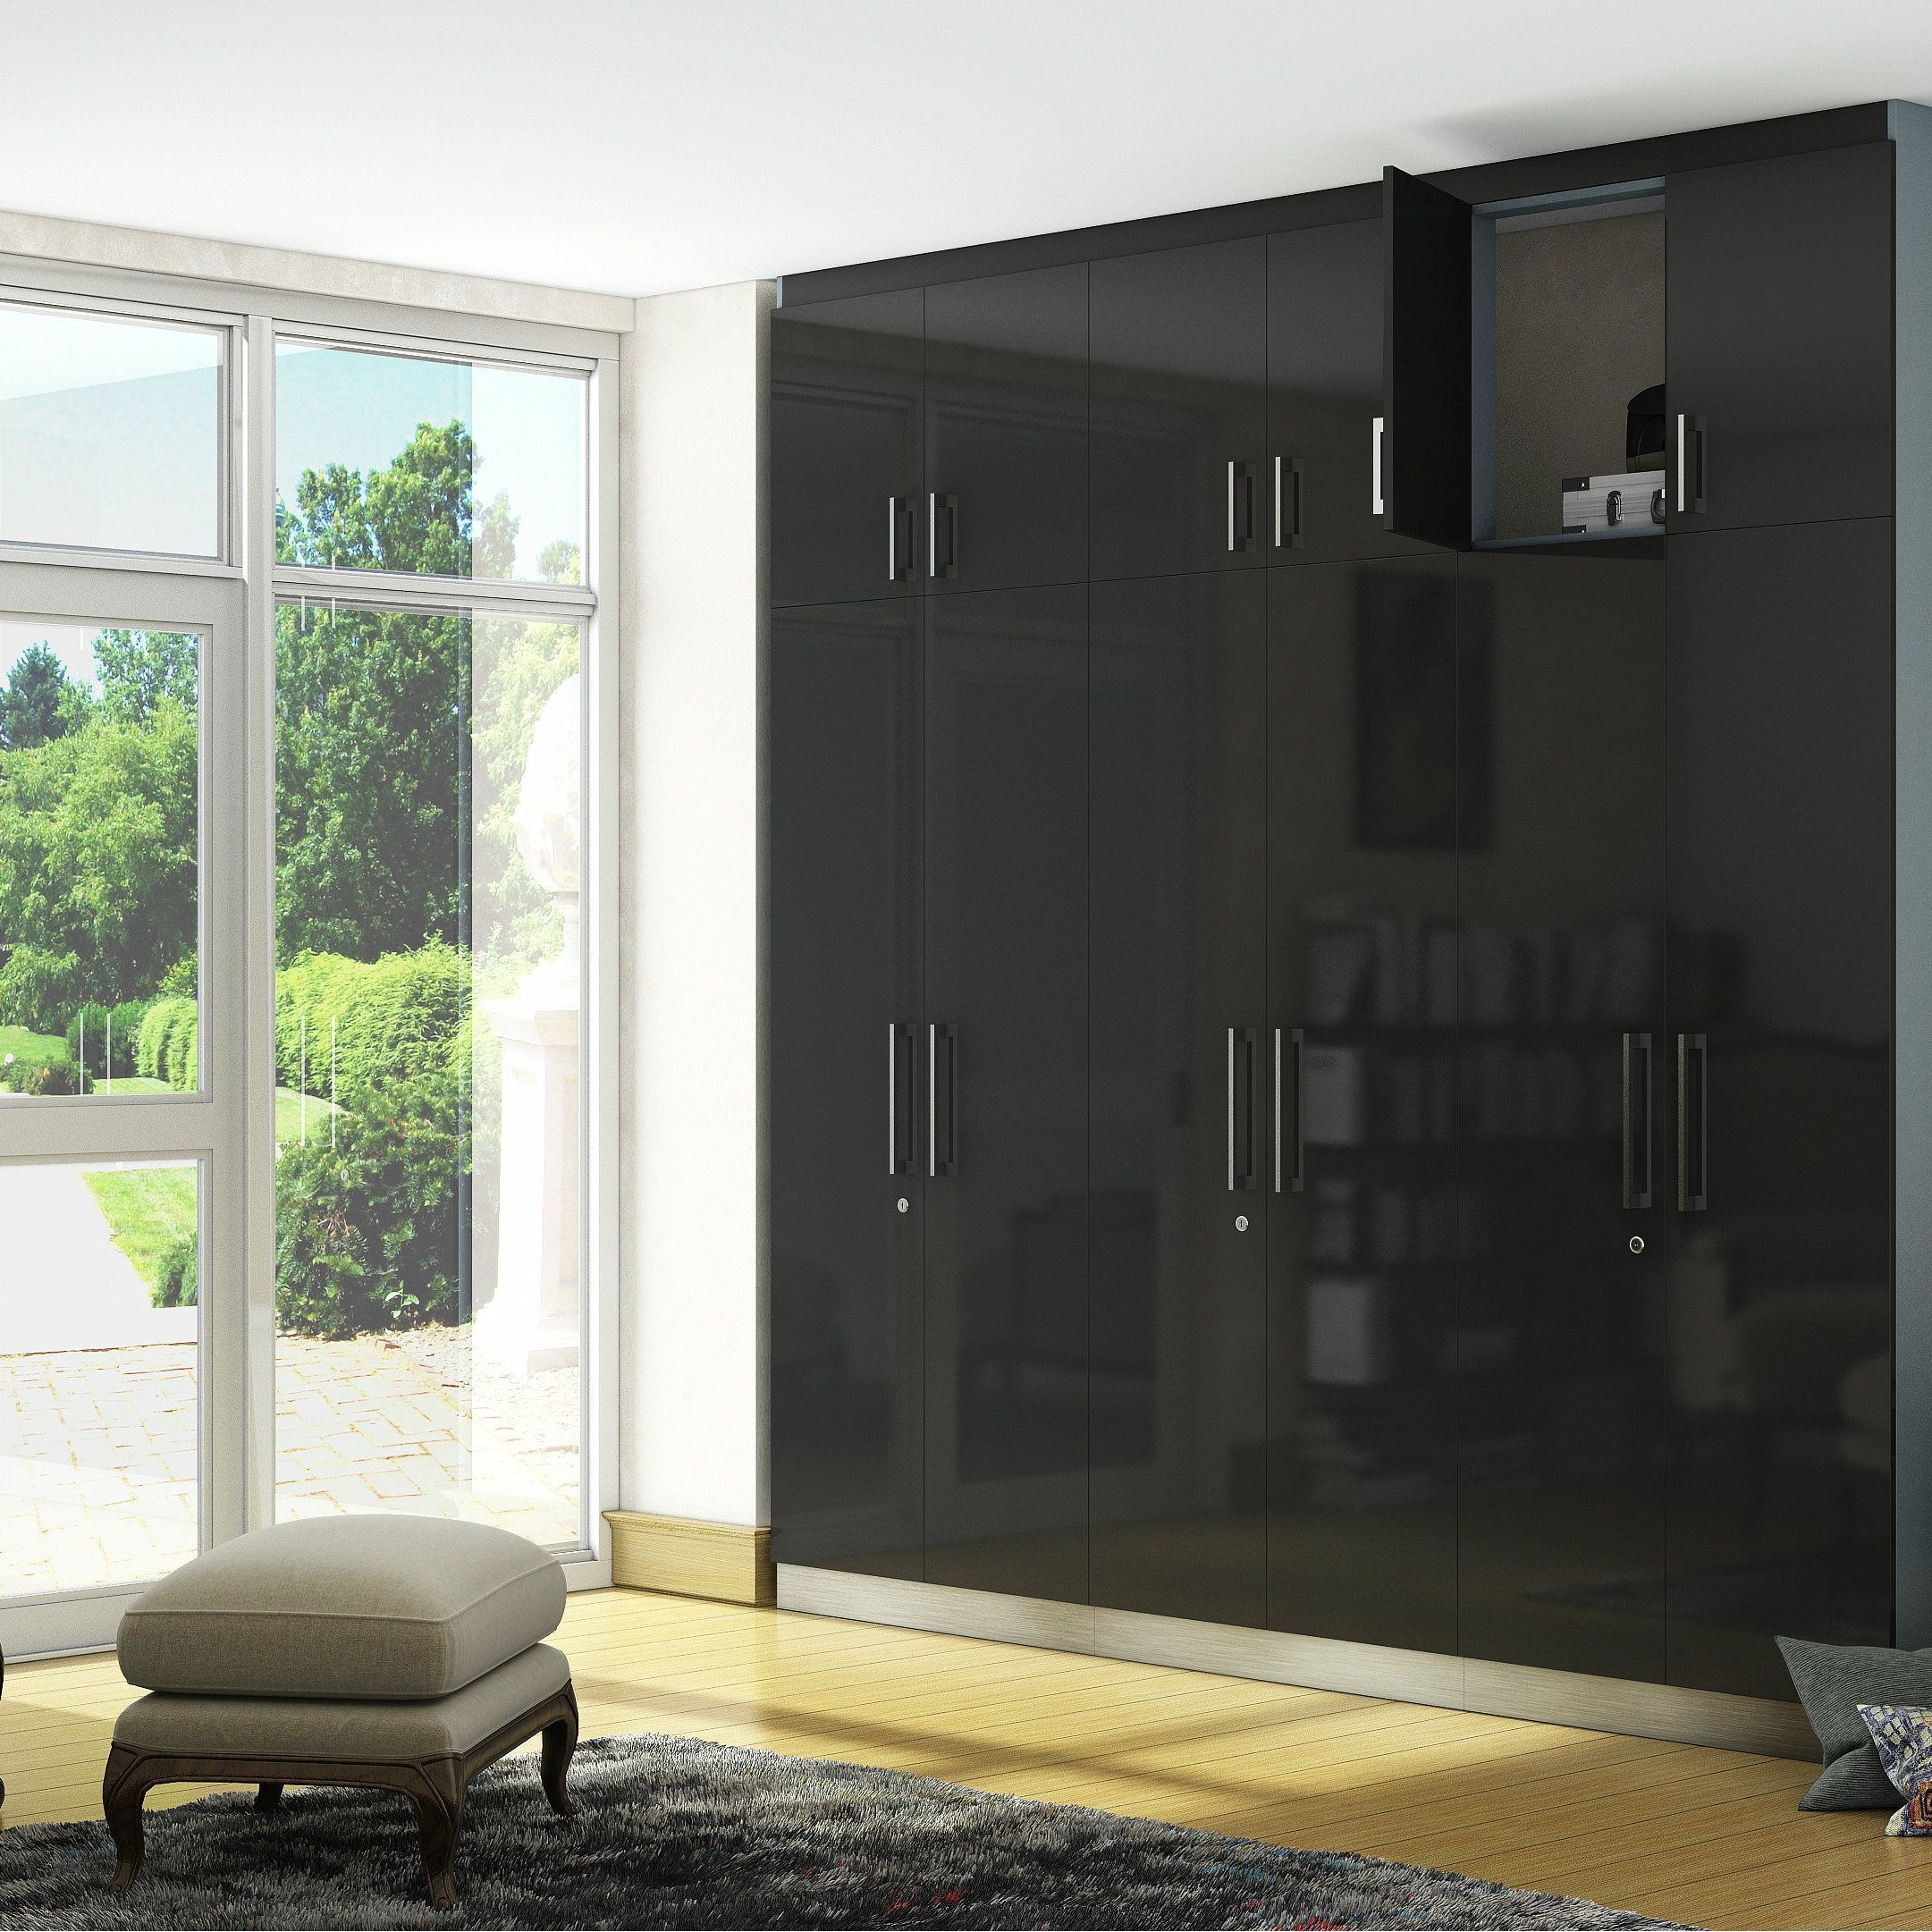 A Glossy Black Wardrobe That Is Every Bit As Impressive And Functional |  Wardrobe Design, Furniture Design, Grey Wardrobe Within Black Shiny Wardrobes (Gallery 2 of 20)